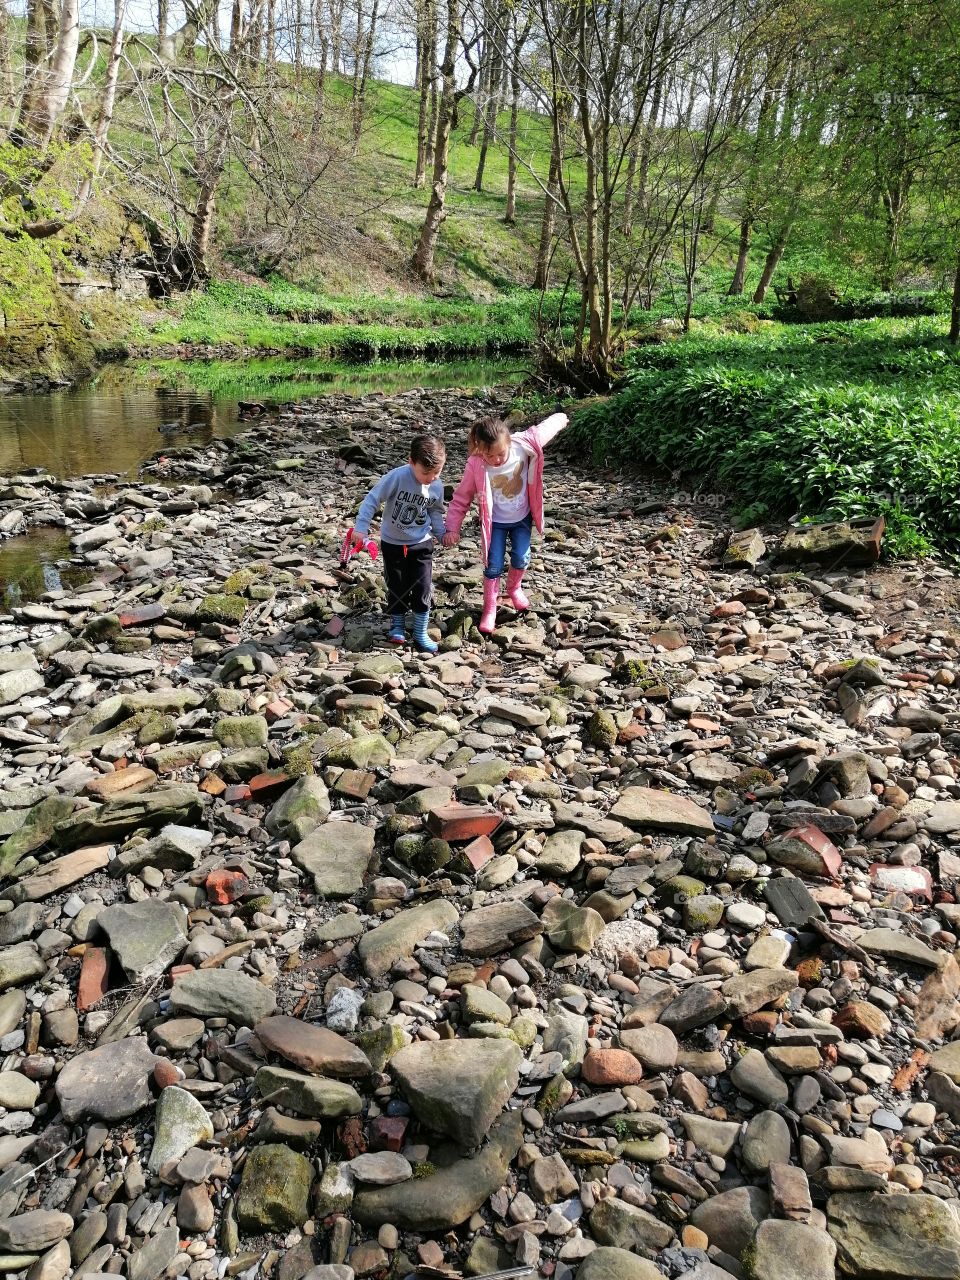 Kids helping each other over the rocky riverside